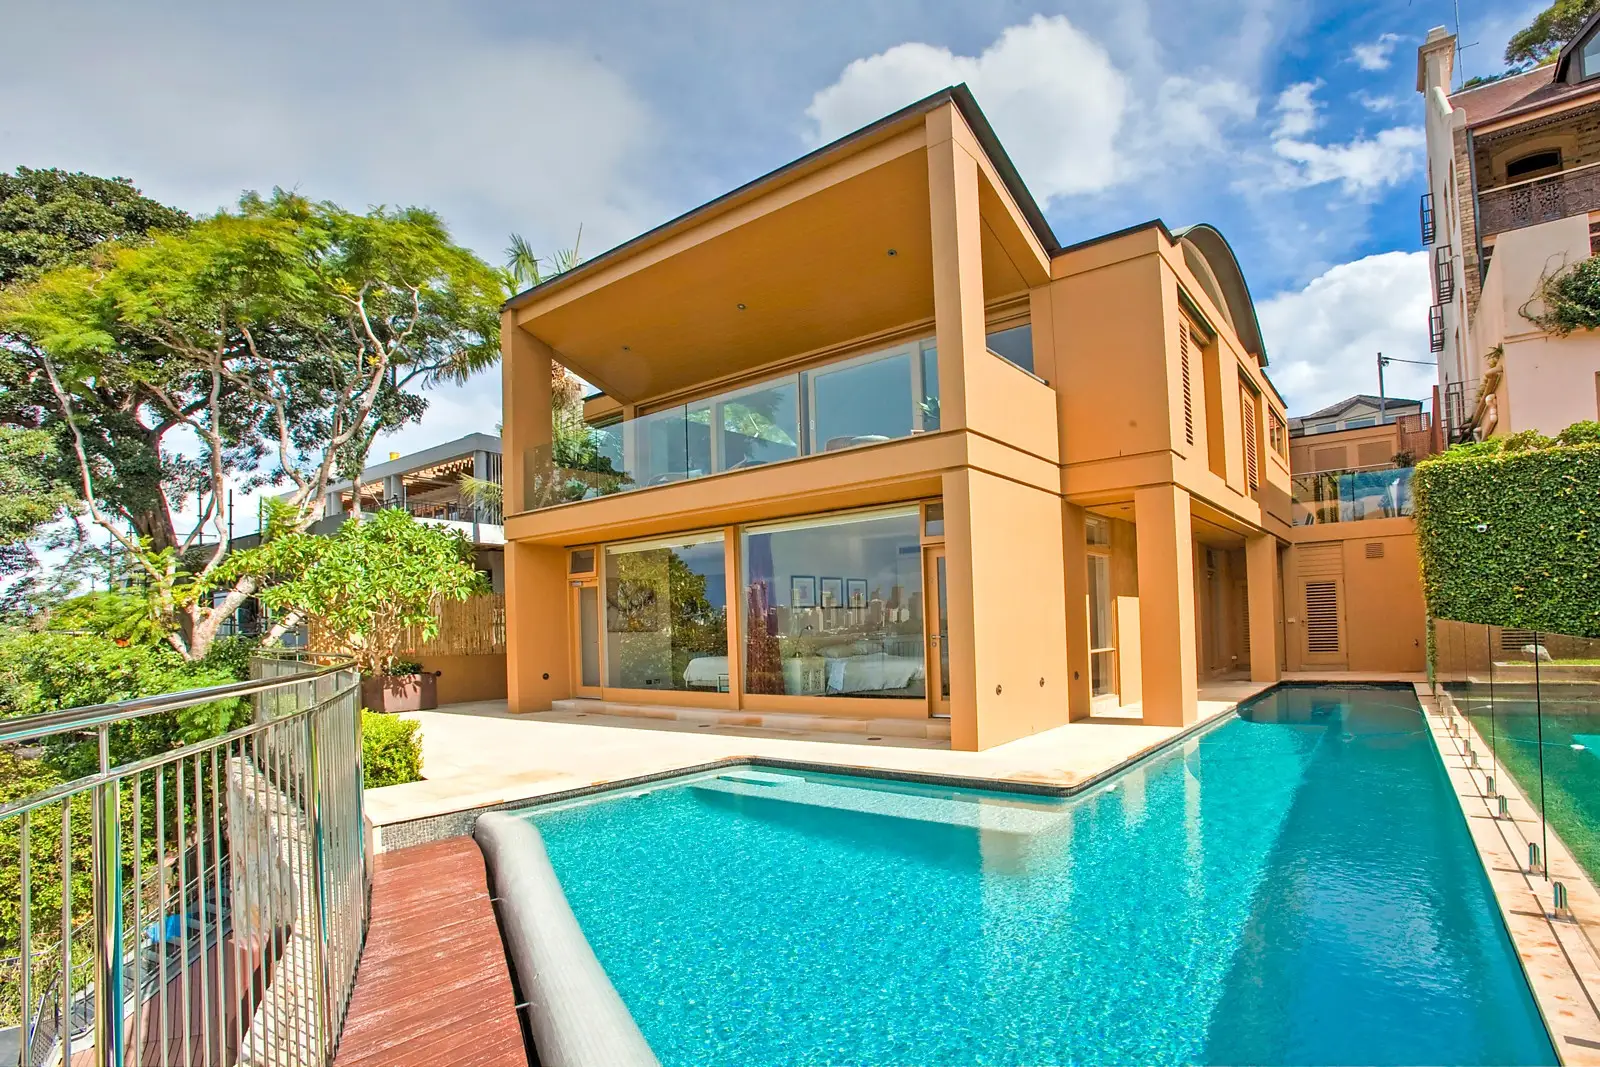 Photo #2: 44 Lower Serpentine Road, Greenwich - Sold by Sydney Sotheby's International Realty